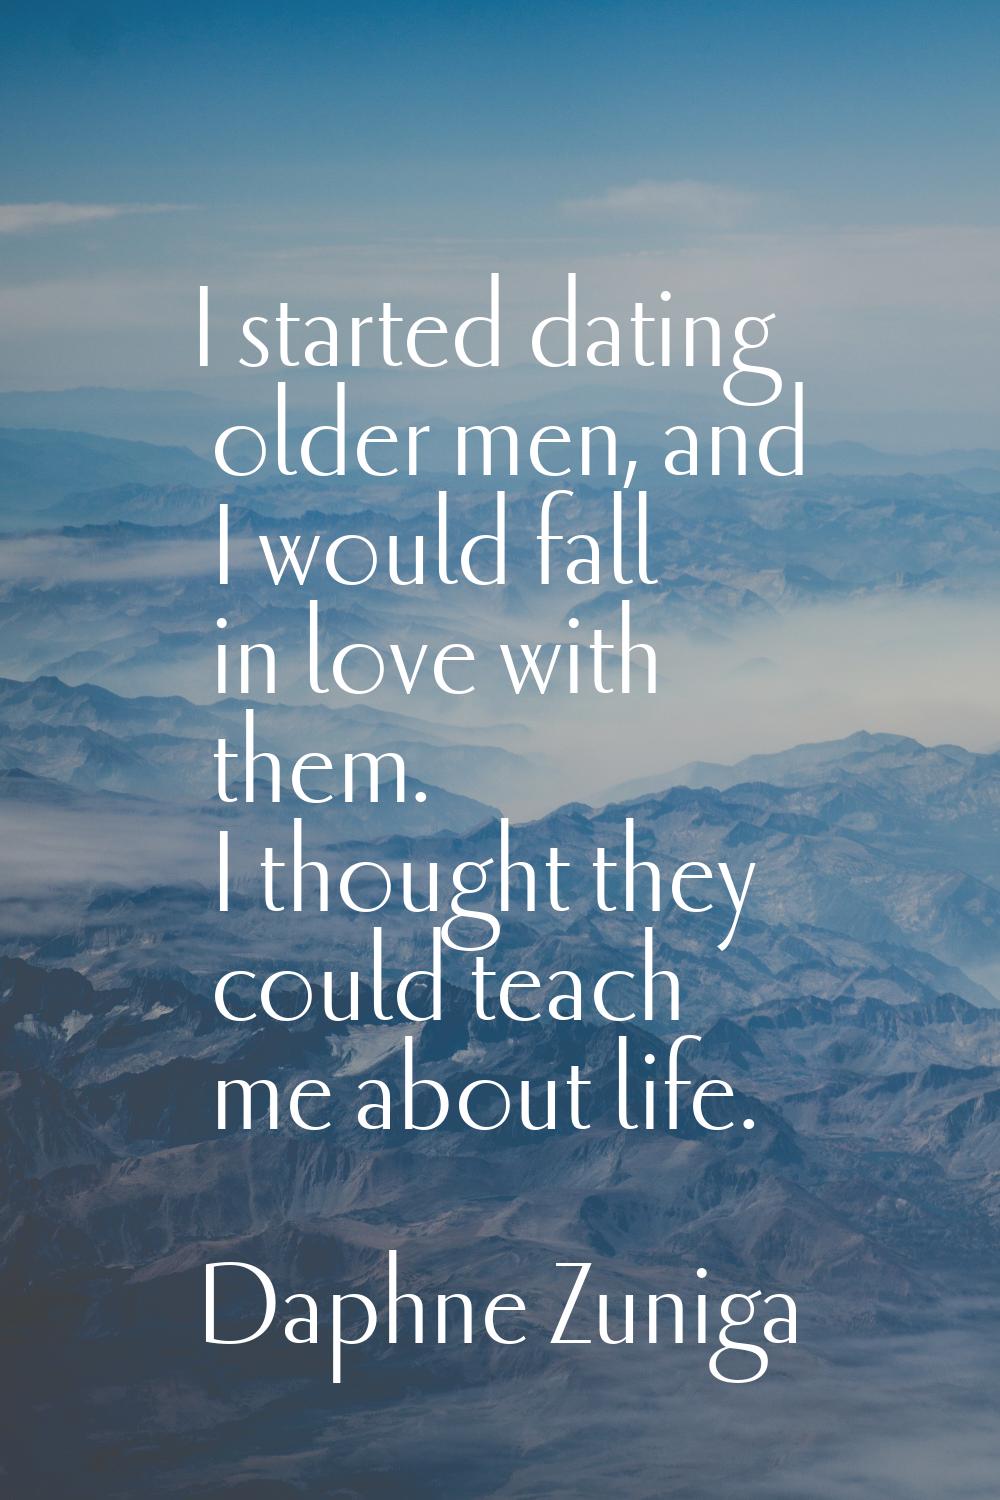 I started dating older men, and I would fall in love with them. I thought they could teach me about